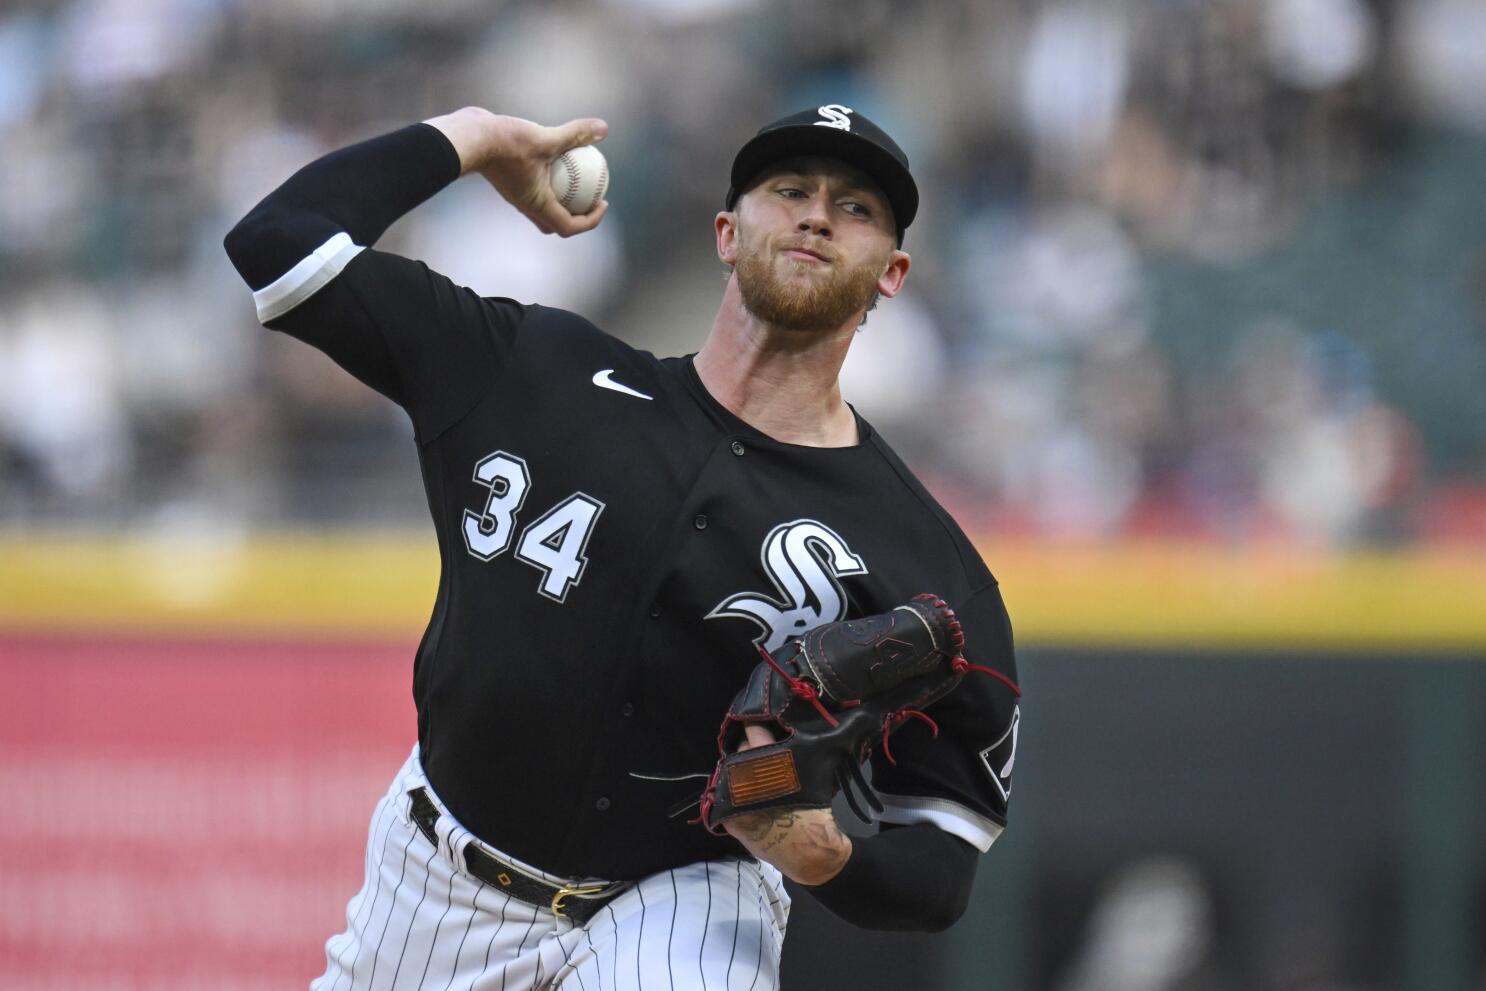 White Sox place RHP Kopech on IL with shoulder inflammation and